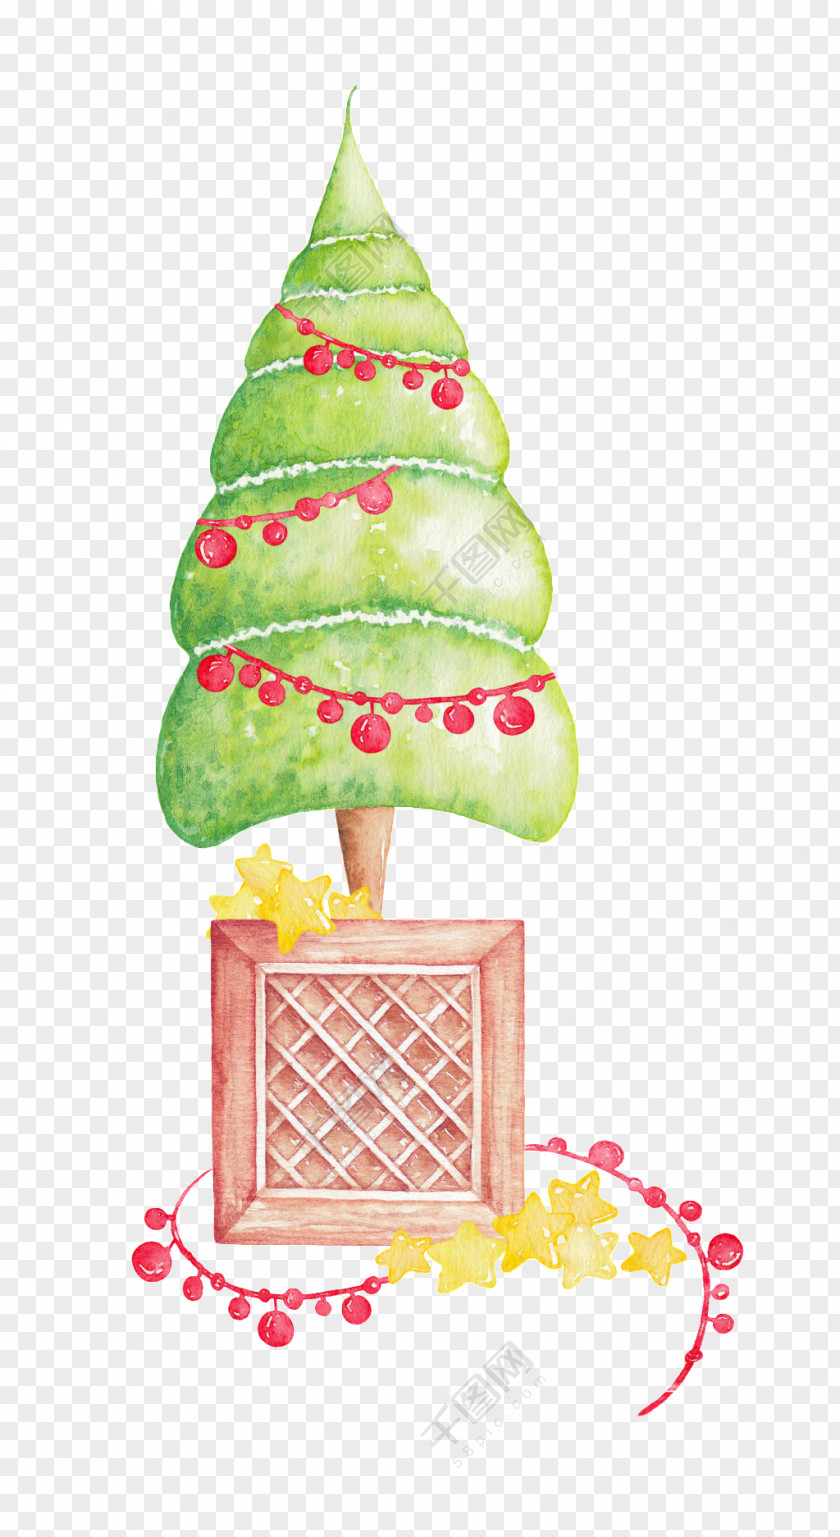 Cute Christmas Tree Santa Claus Day Ornament Decoration PNG